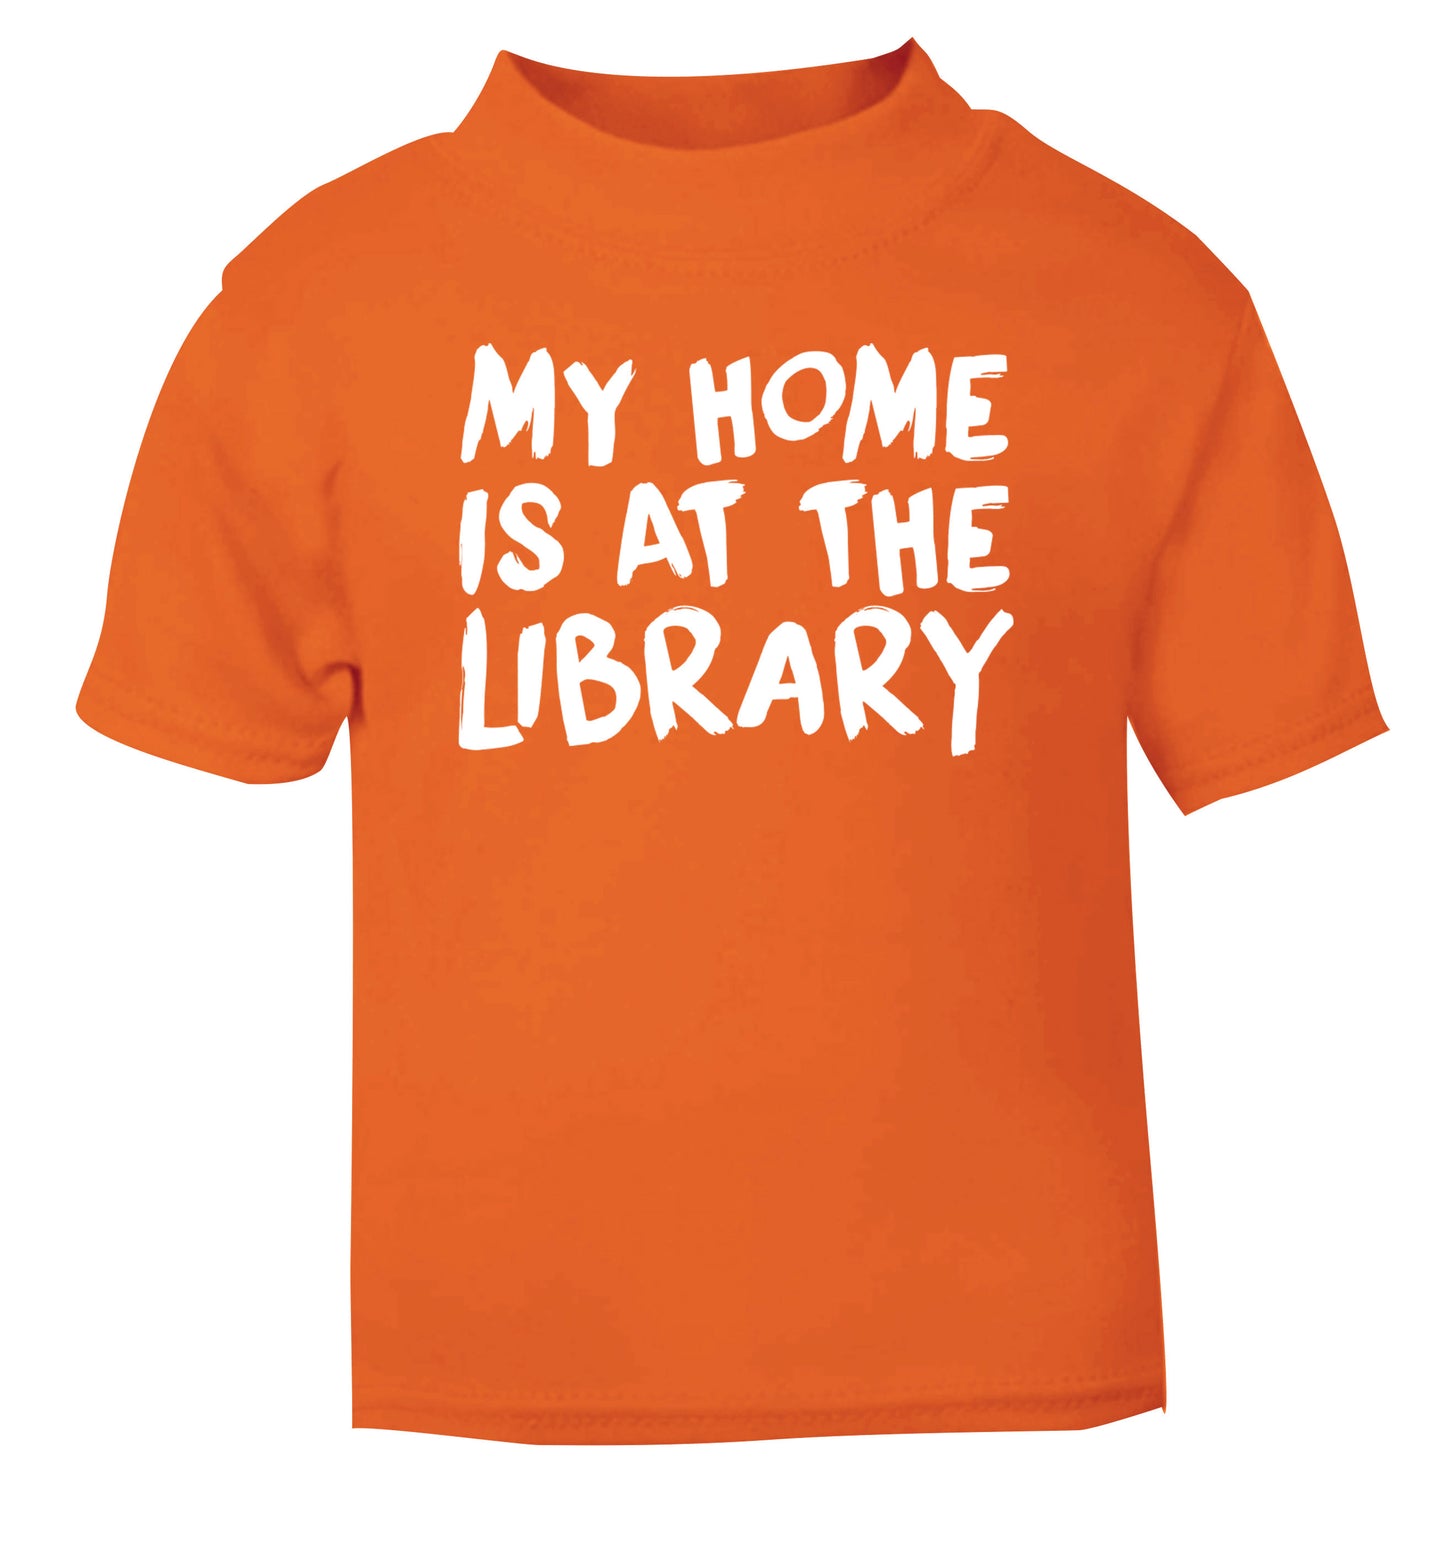 My home is at the library orange Baby Toddler Tshirt 2 Years